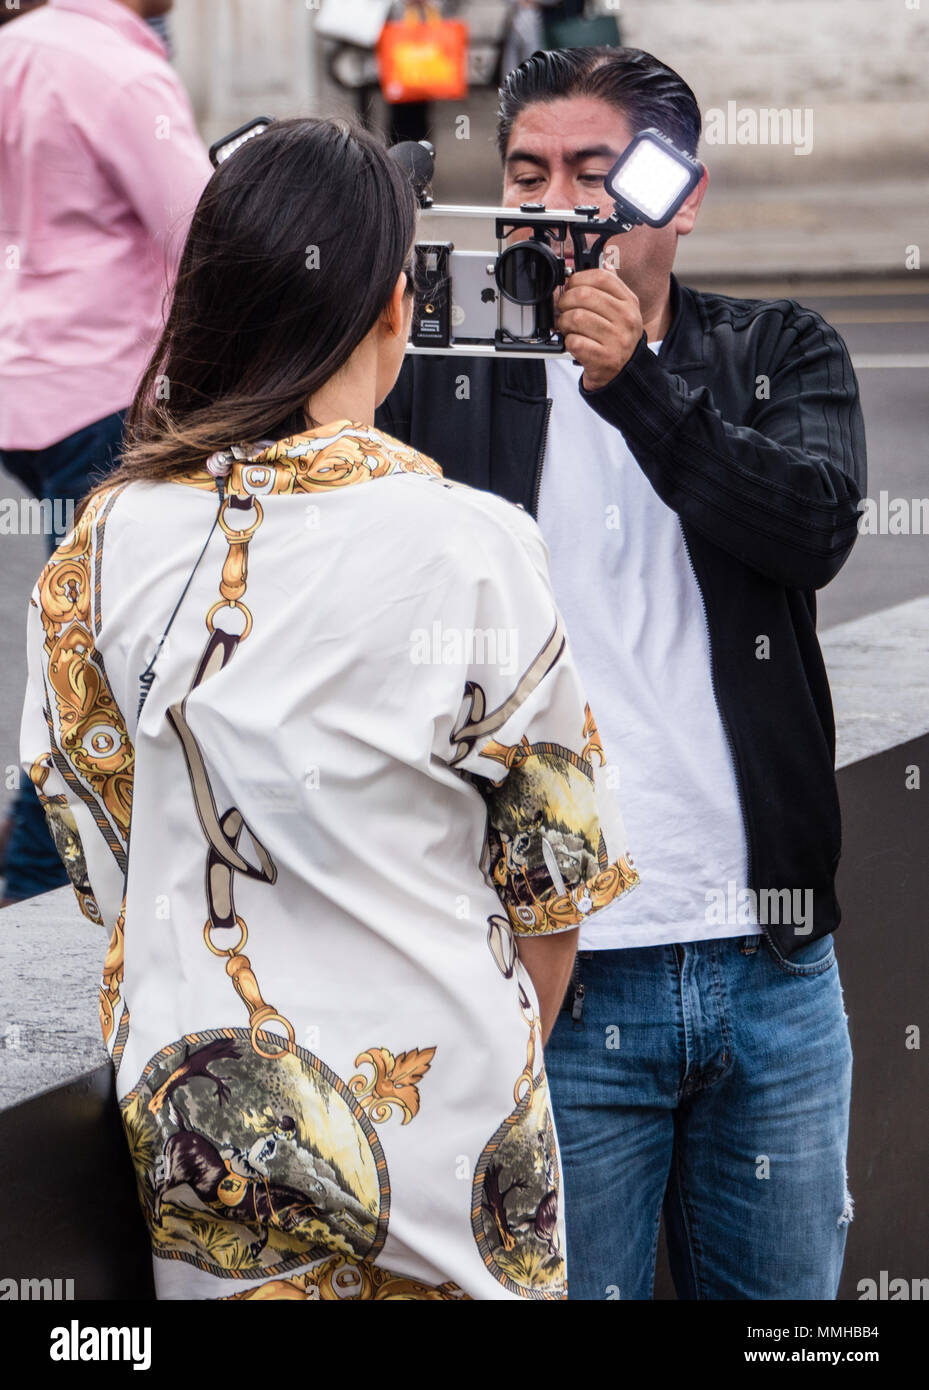 Latin American Reporter, Reporting on Royal Wedding with iPhone Camera Rig, Windsor, Castle, Windsor, Berkshire, England, UK, GB. Stock Photo